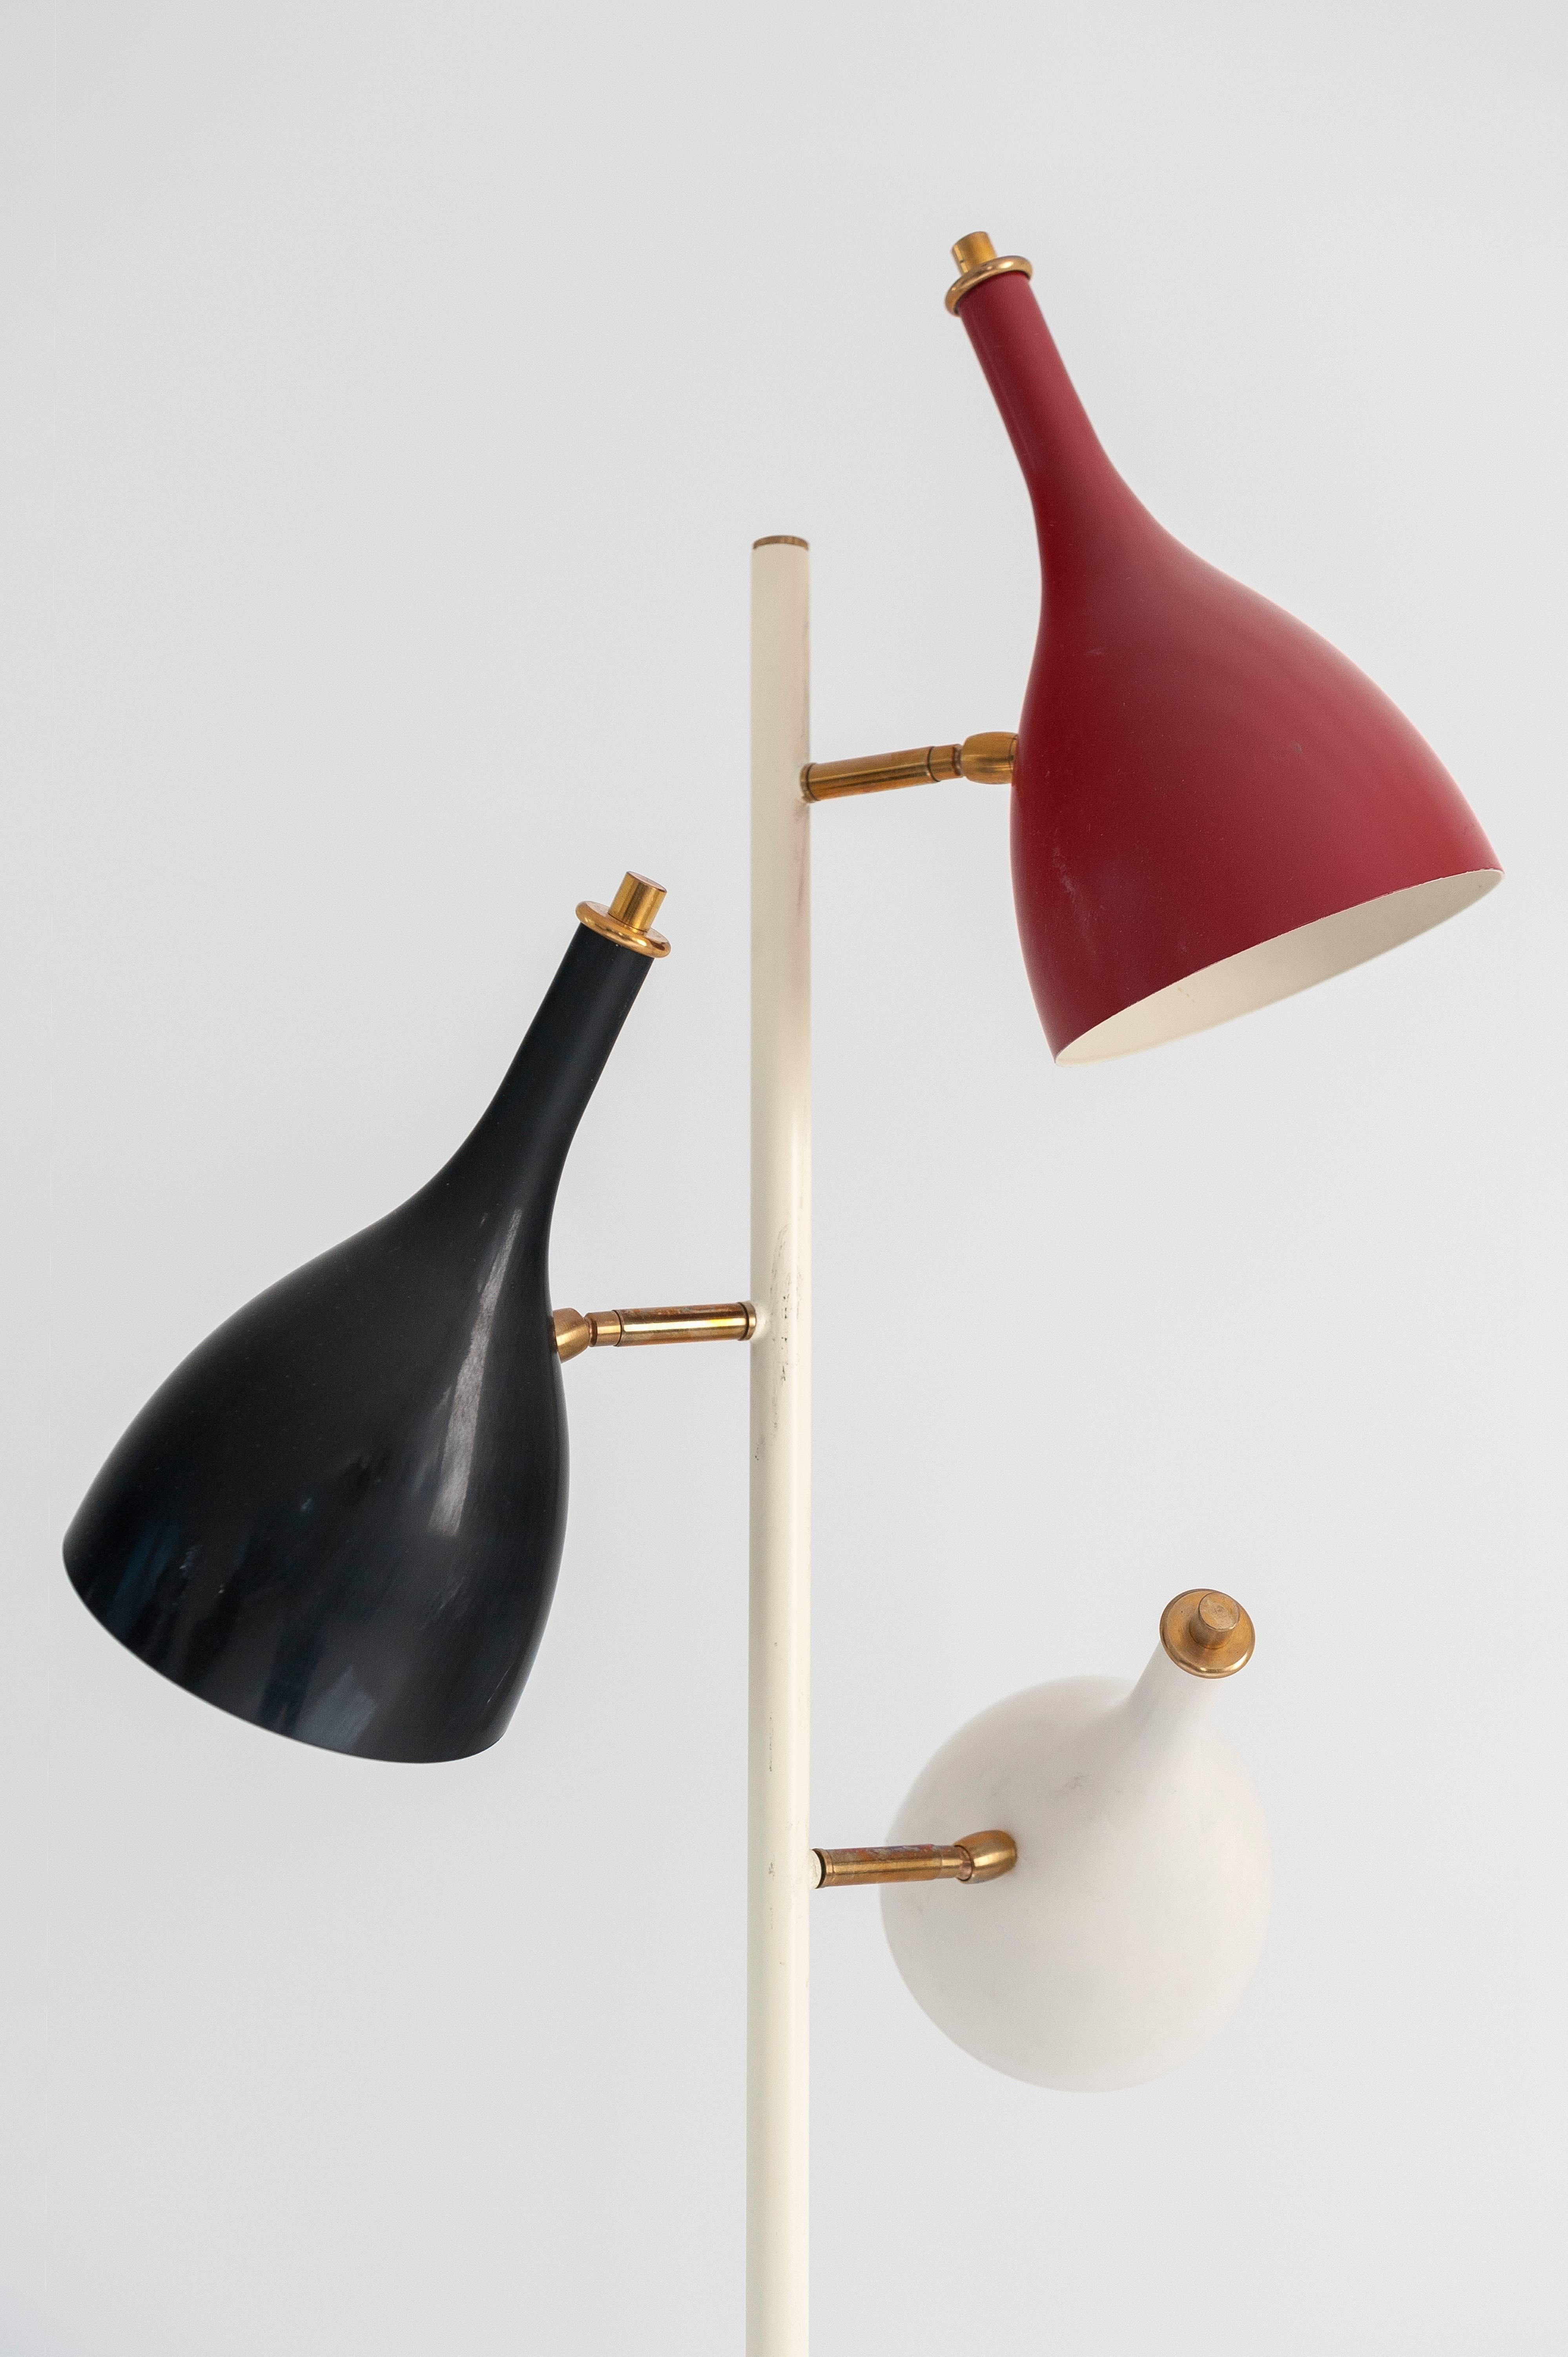 Vintage floor lamp with a black marble base, the structure is in brass and the shade are in coloured aluminium; red black white
attributed to Stilnovo, Italy, circa 1960.
Measures: H 193 cm, long 50 cm, base 35 cm.
H 75.98